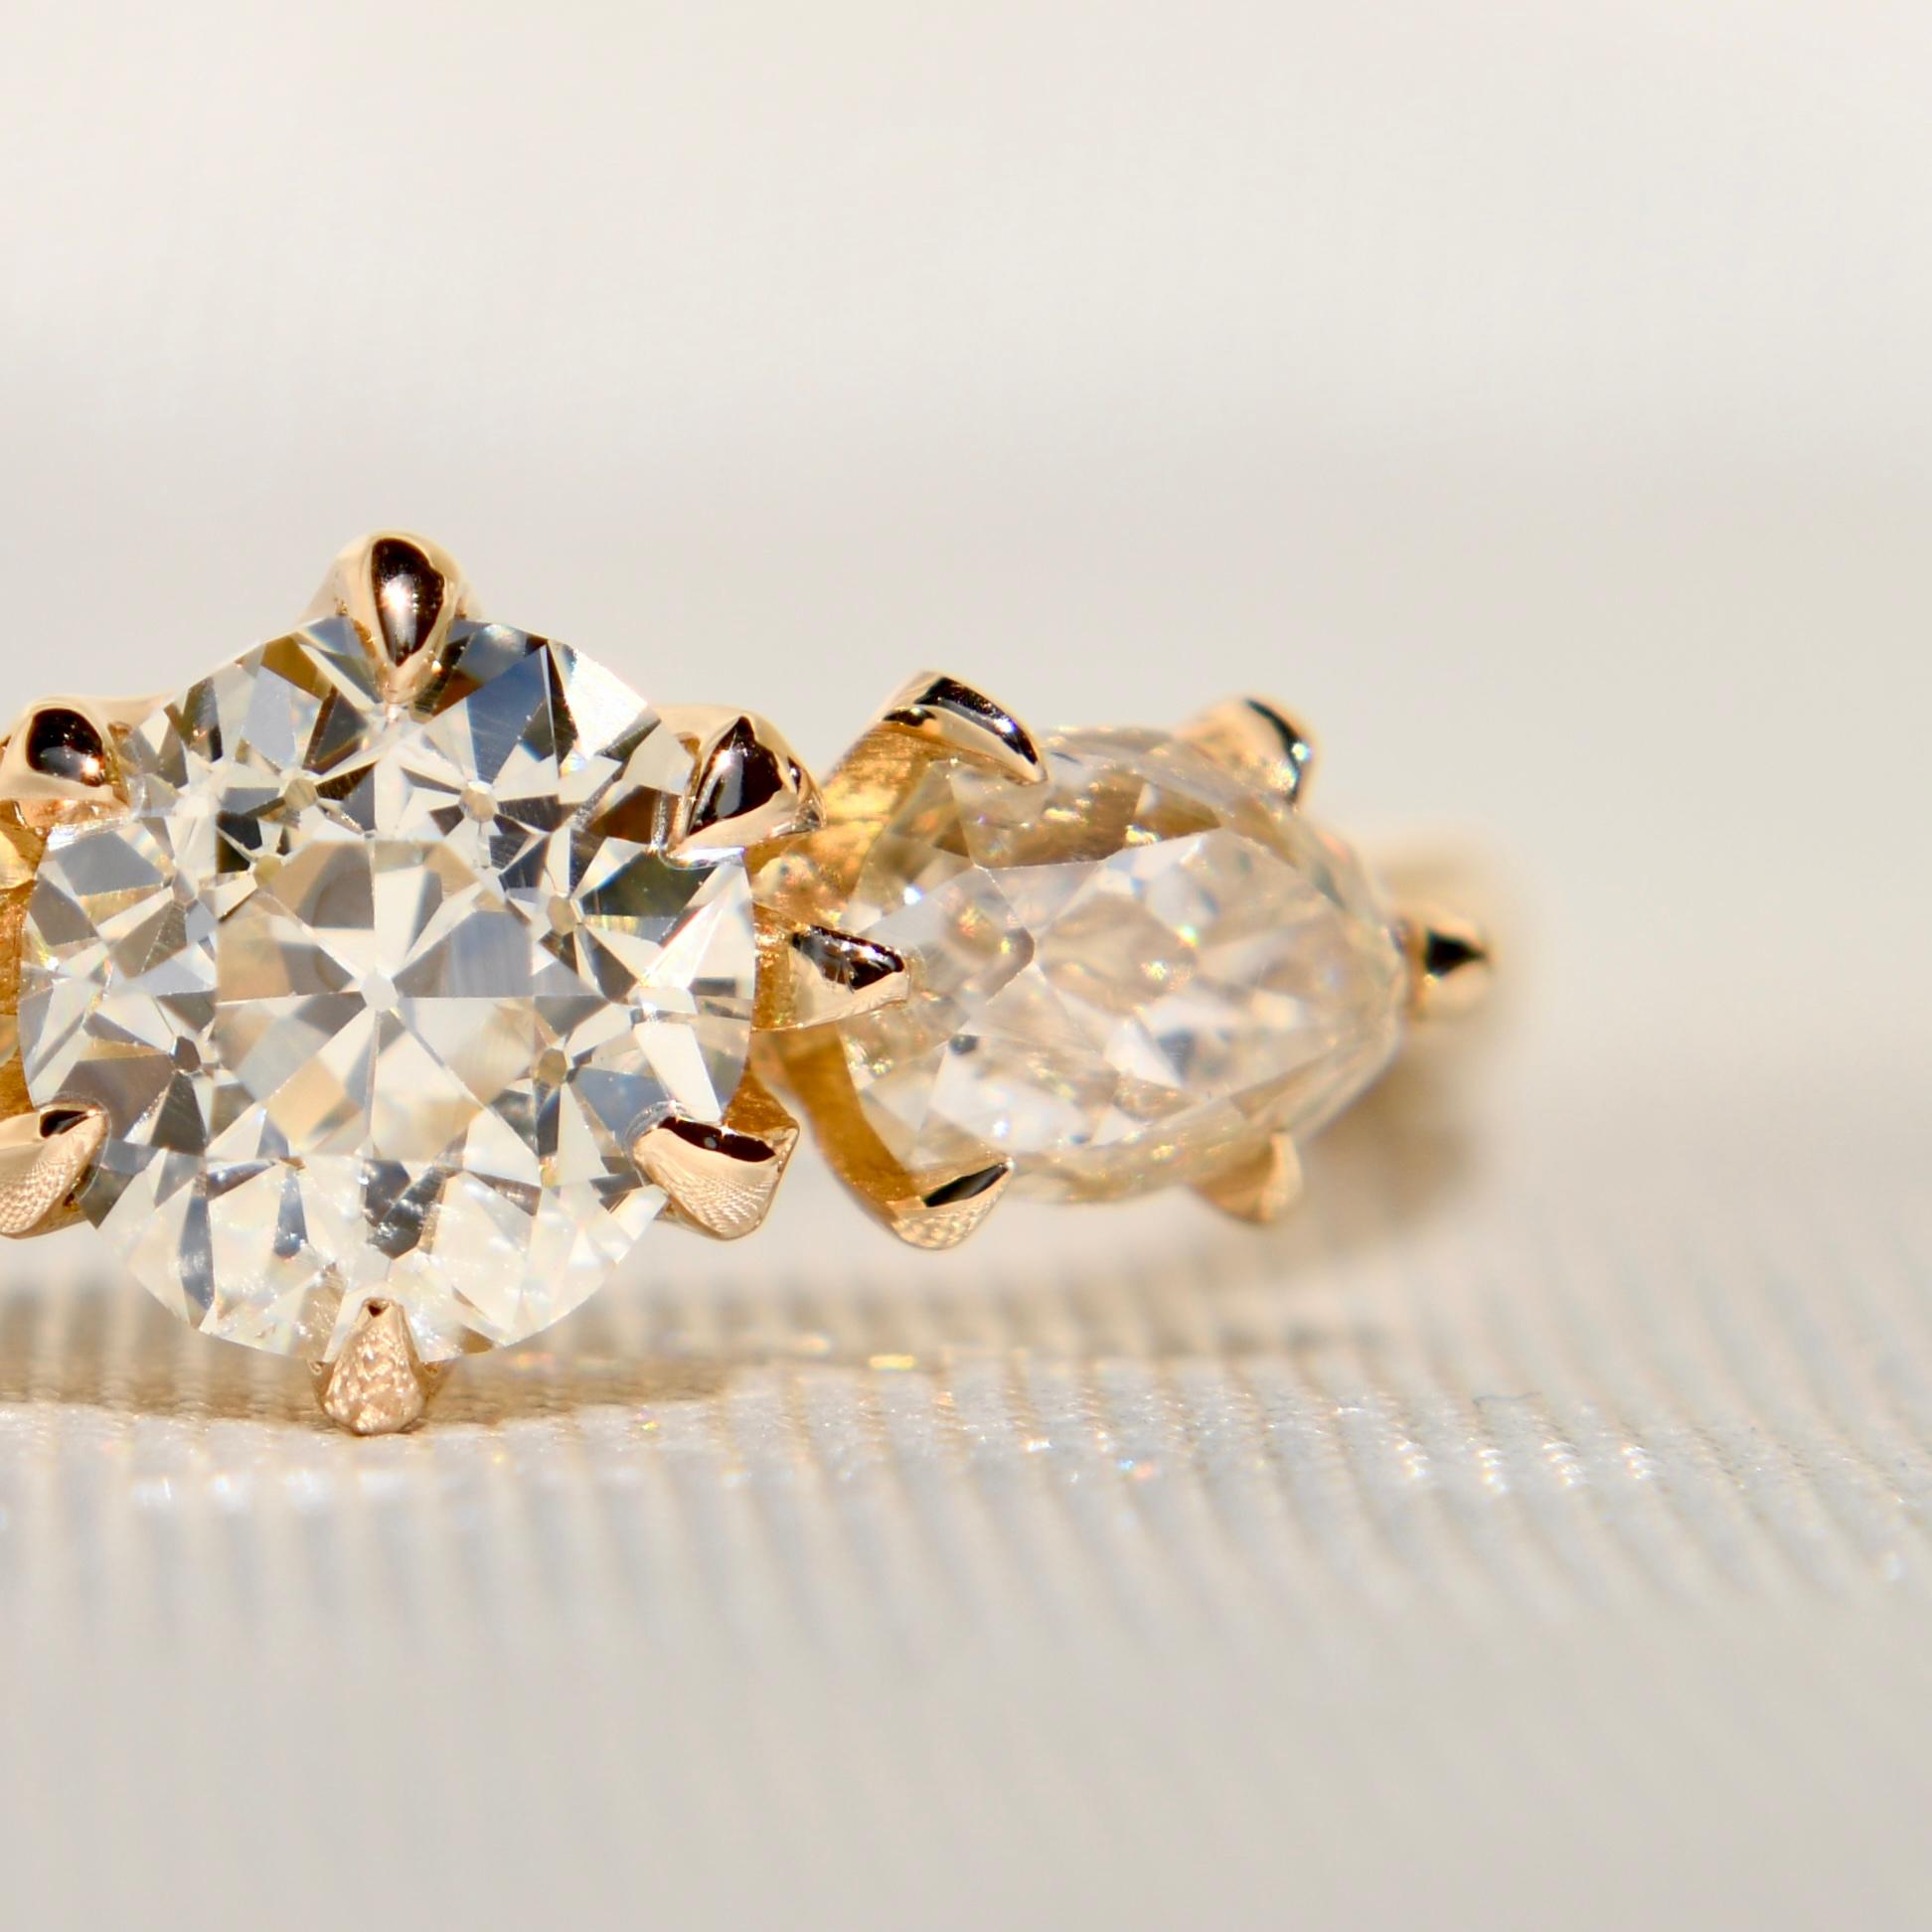 This ring was newly made by Beaubijouxantique.
The diamonds are all antique from the 19th century/ early 20th century.

- One GIA certified old European cut diamond, 0.89 ct (Q to R Range/ VS2) 
- Two old pear cut diamonds, 0.91 ct total (K/ SI1)
-